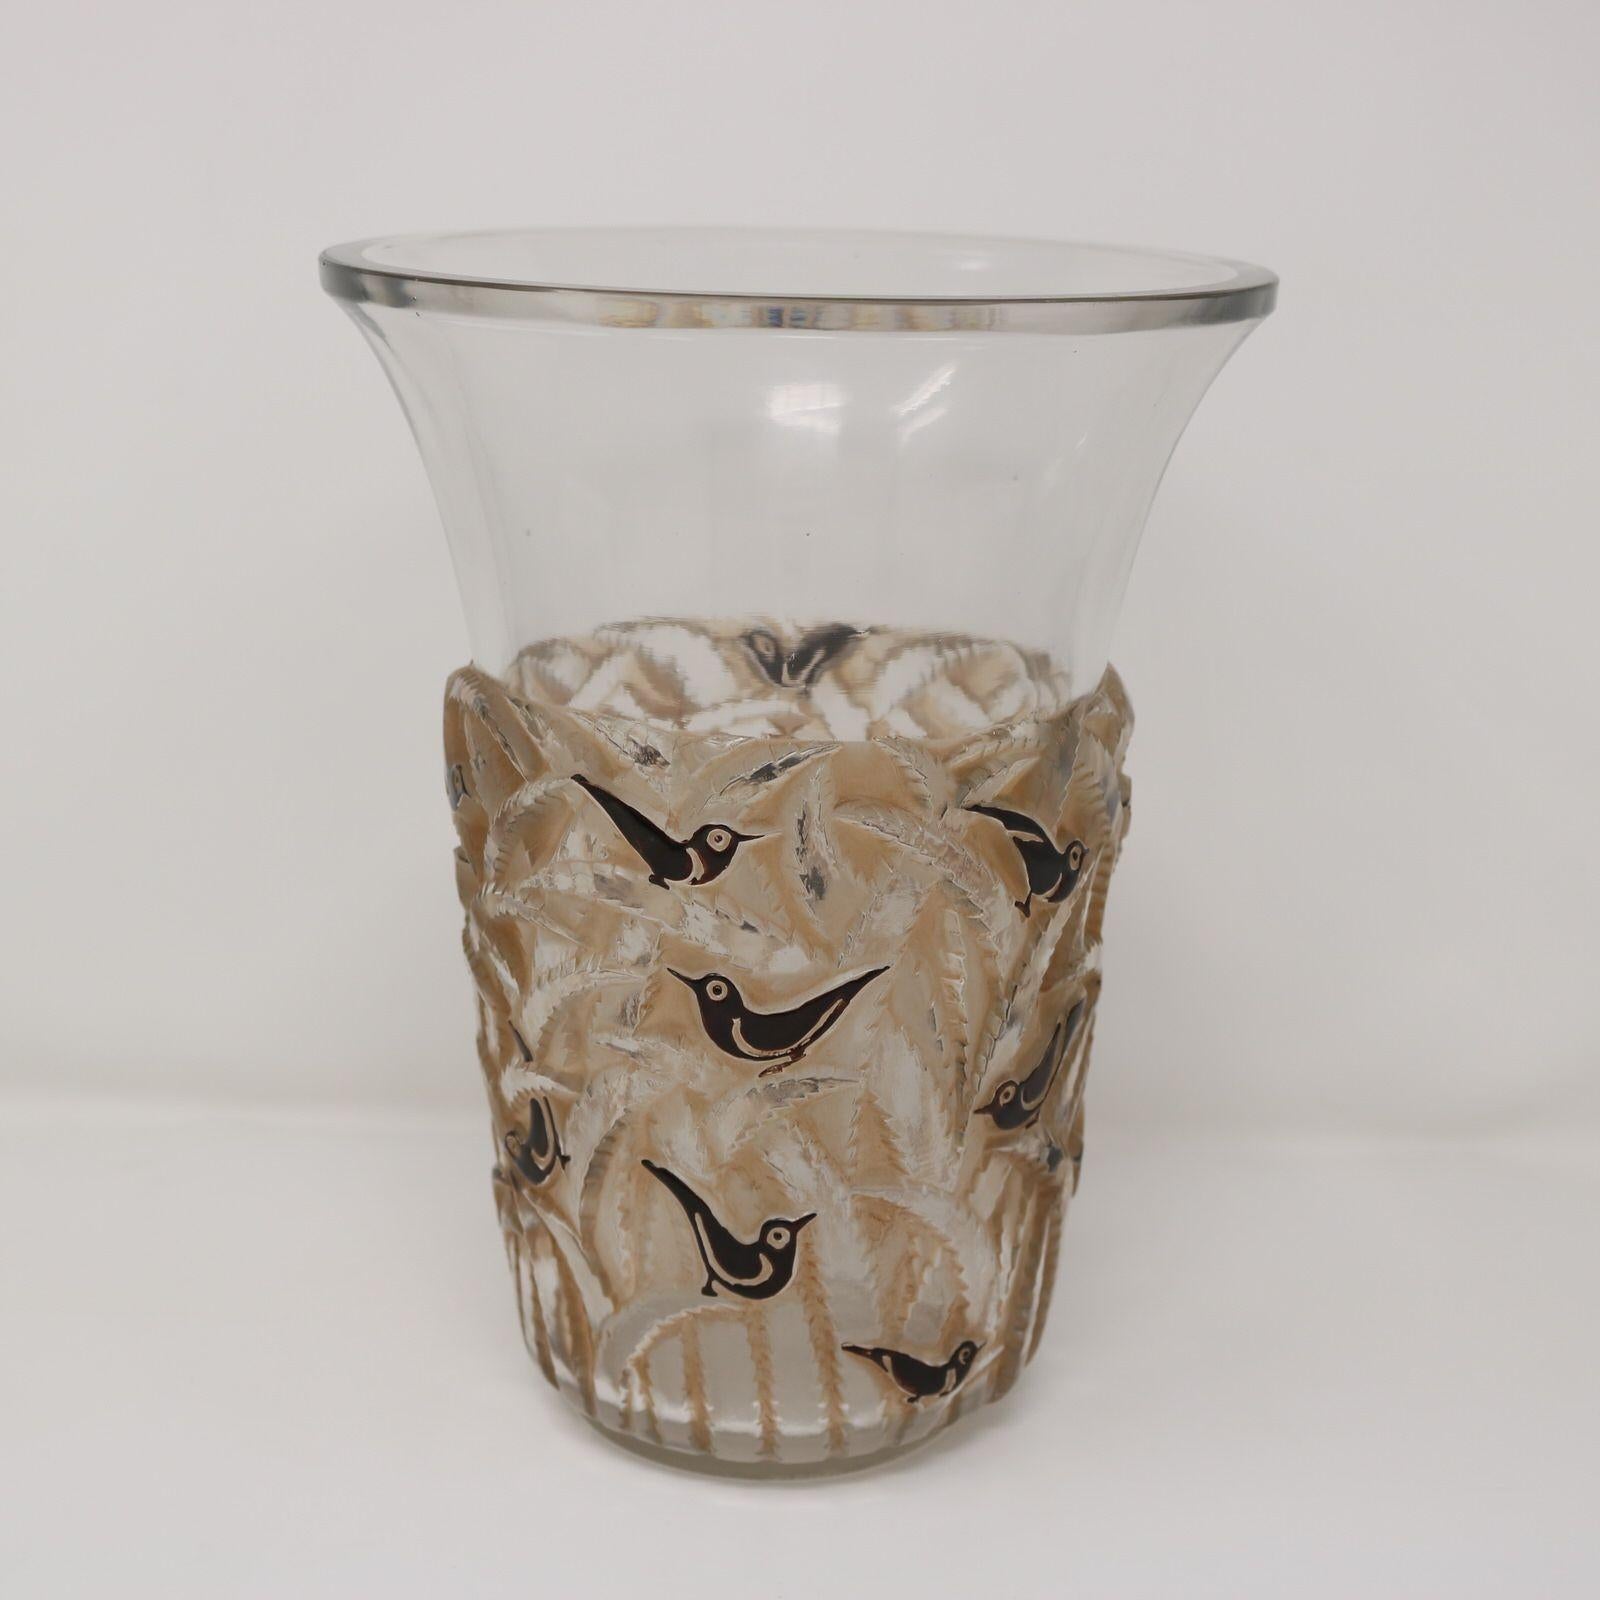 Rene Lalique clear and frosted glass 'Borneo' vase. The pattern features birds perched amongst fern-like foliage. The birds are painted in black enamel and the foliage has sepia staining. Engraved makers mark, 'R Lalique France' to the underside.